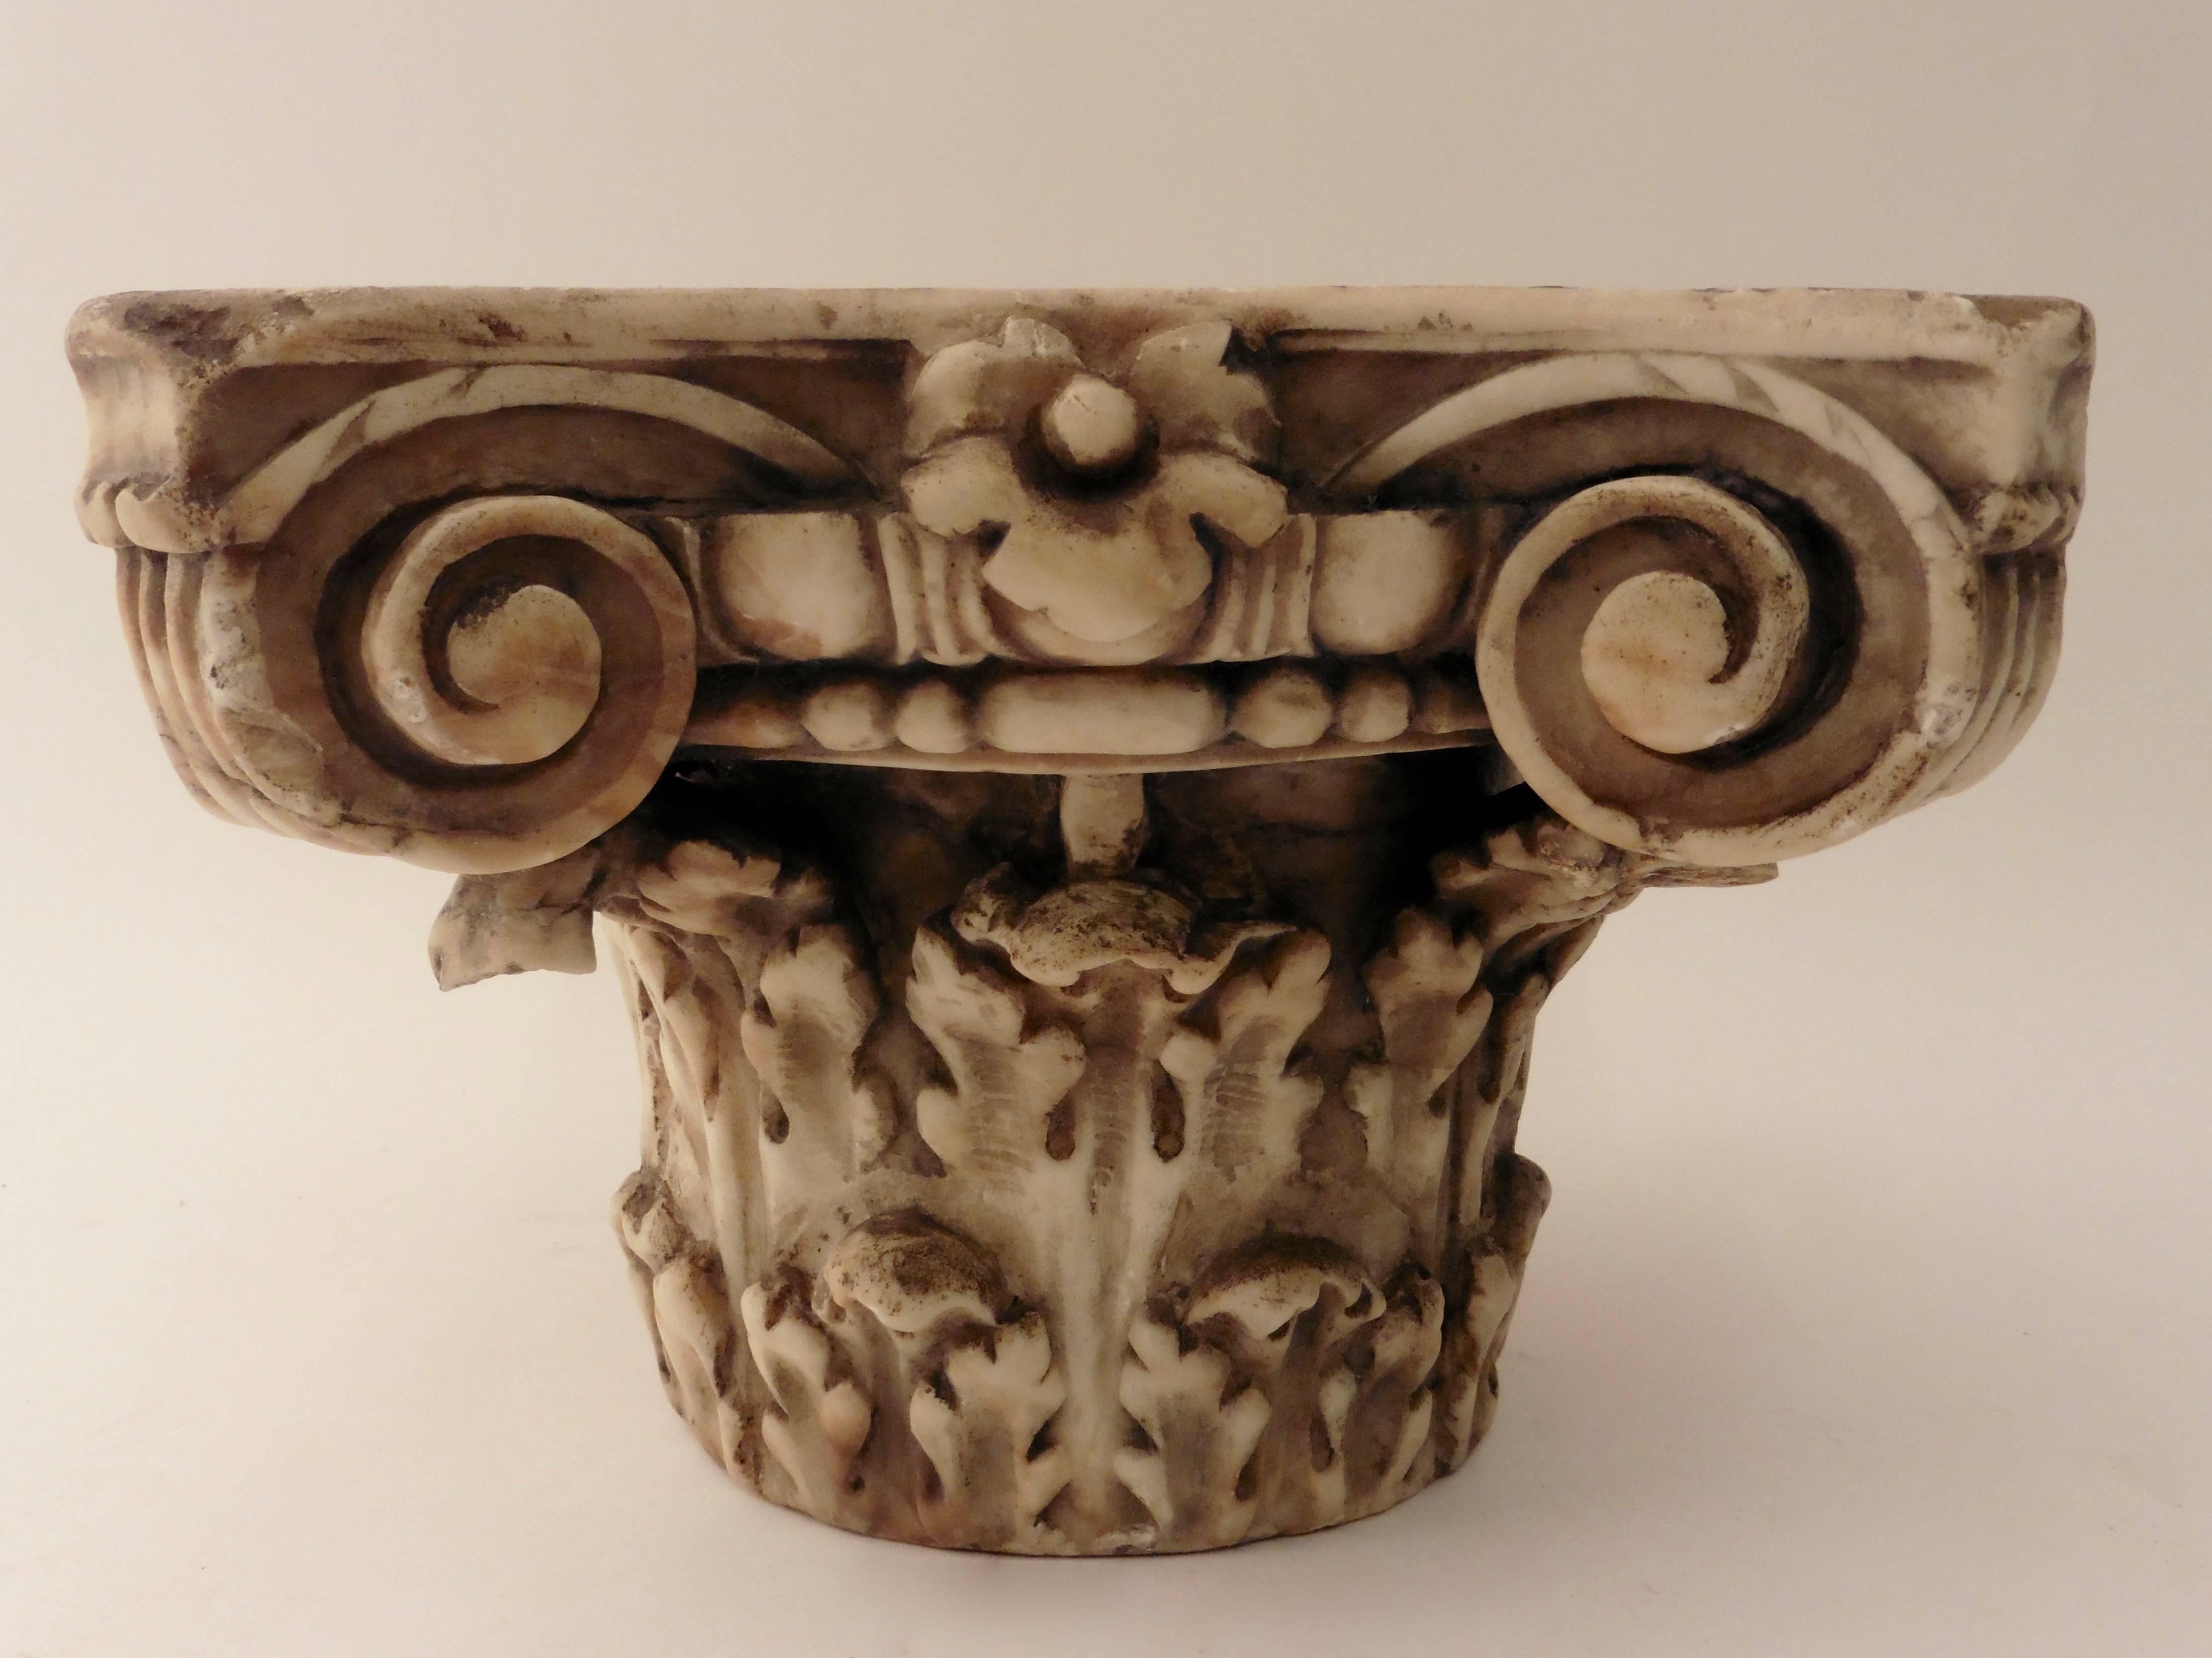 An elaborate carved white marble Corinthian capital decorated with acanthus leaves and scrolls, after the antique. With a hole in the base so that it may be fixed onto a typical slender fluted Corinthian column, Italian, 19th century.